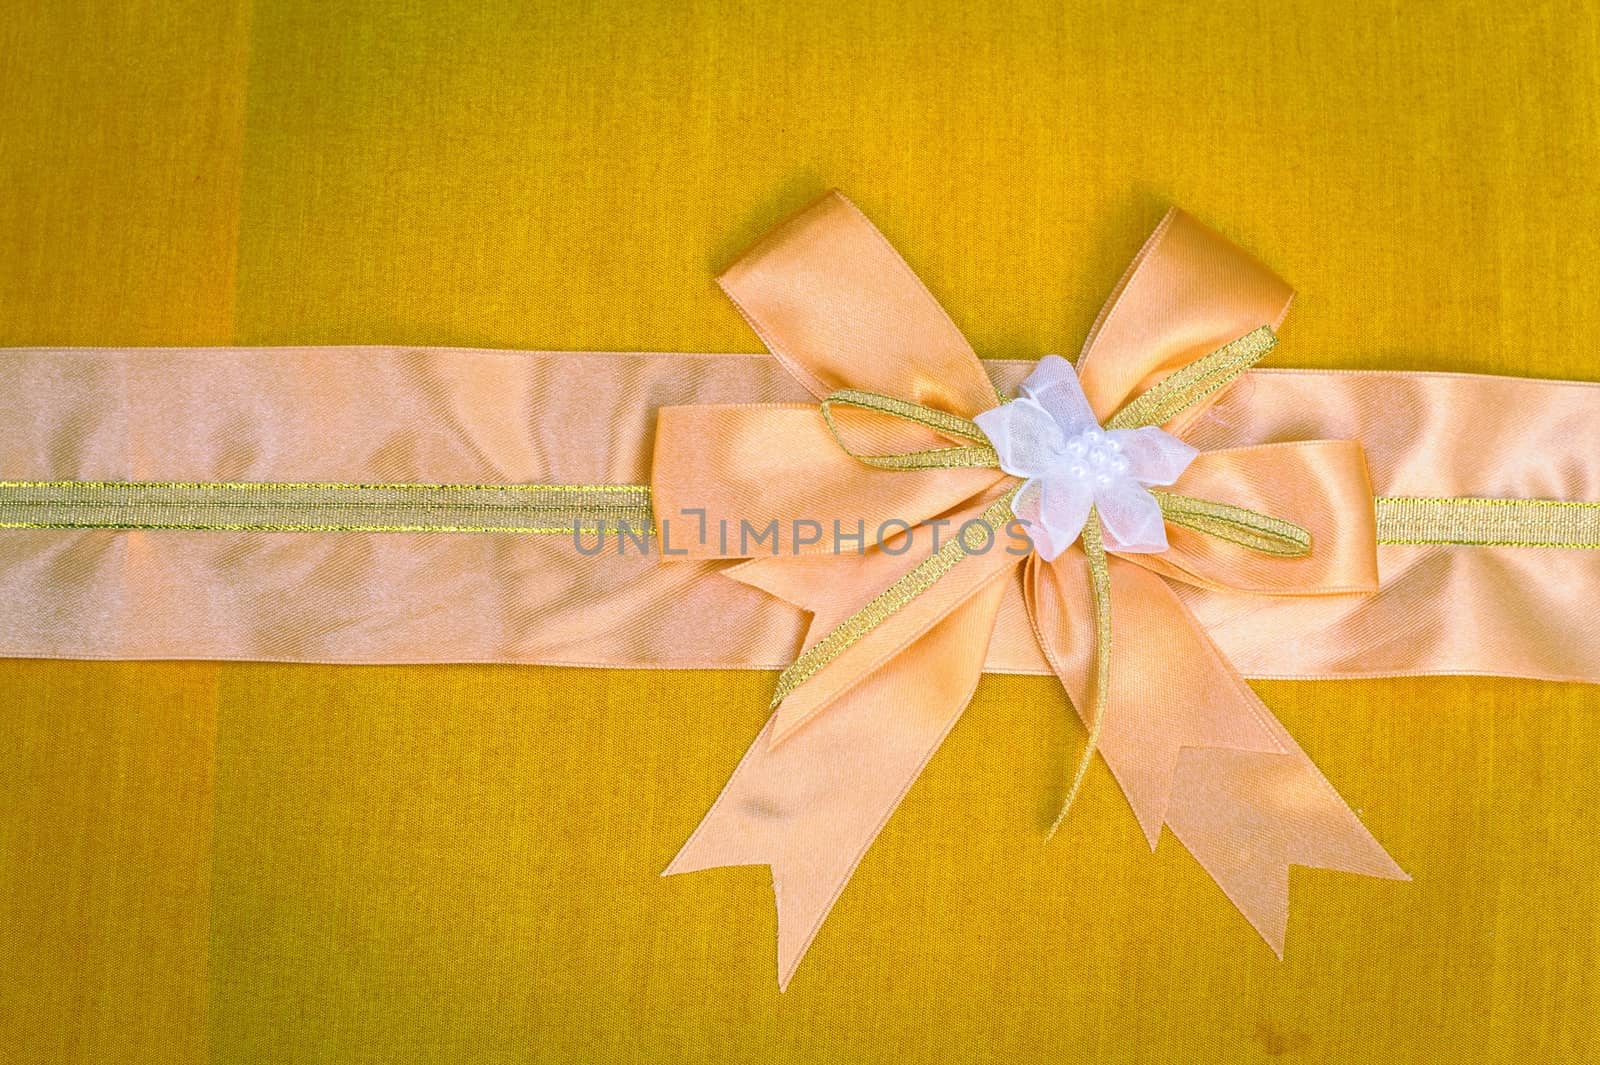 Abstract ribbon bow on fabric background.